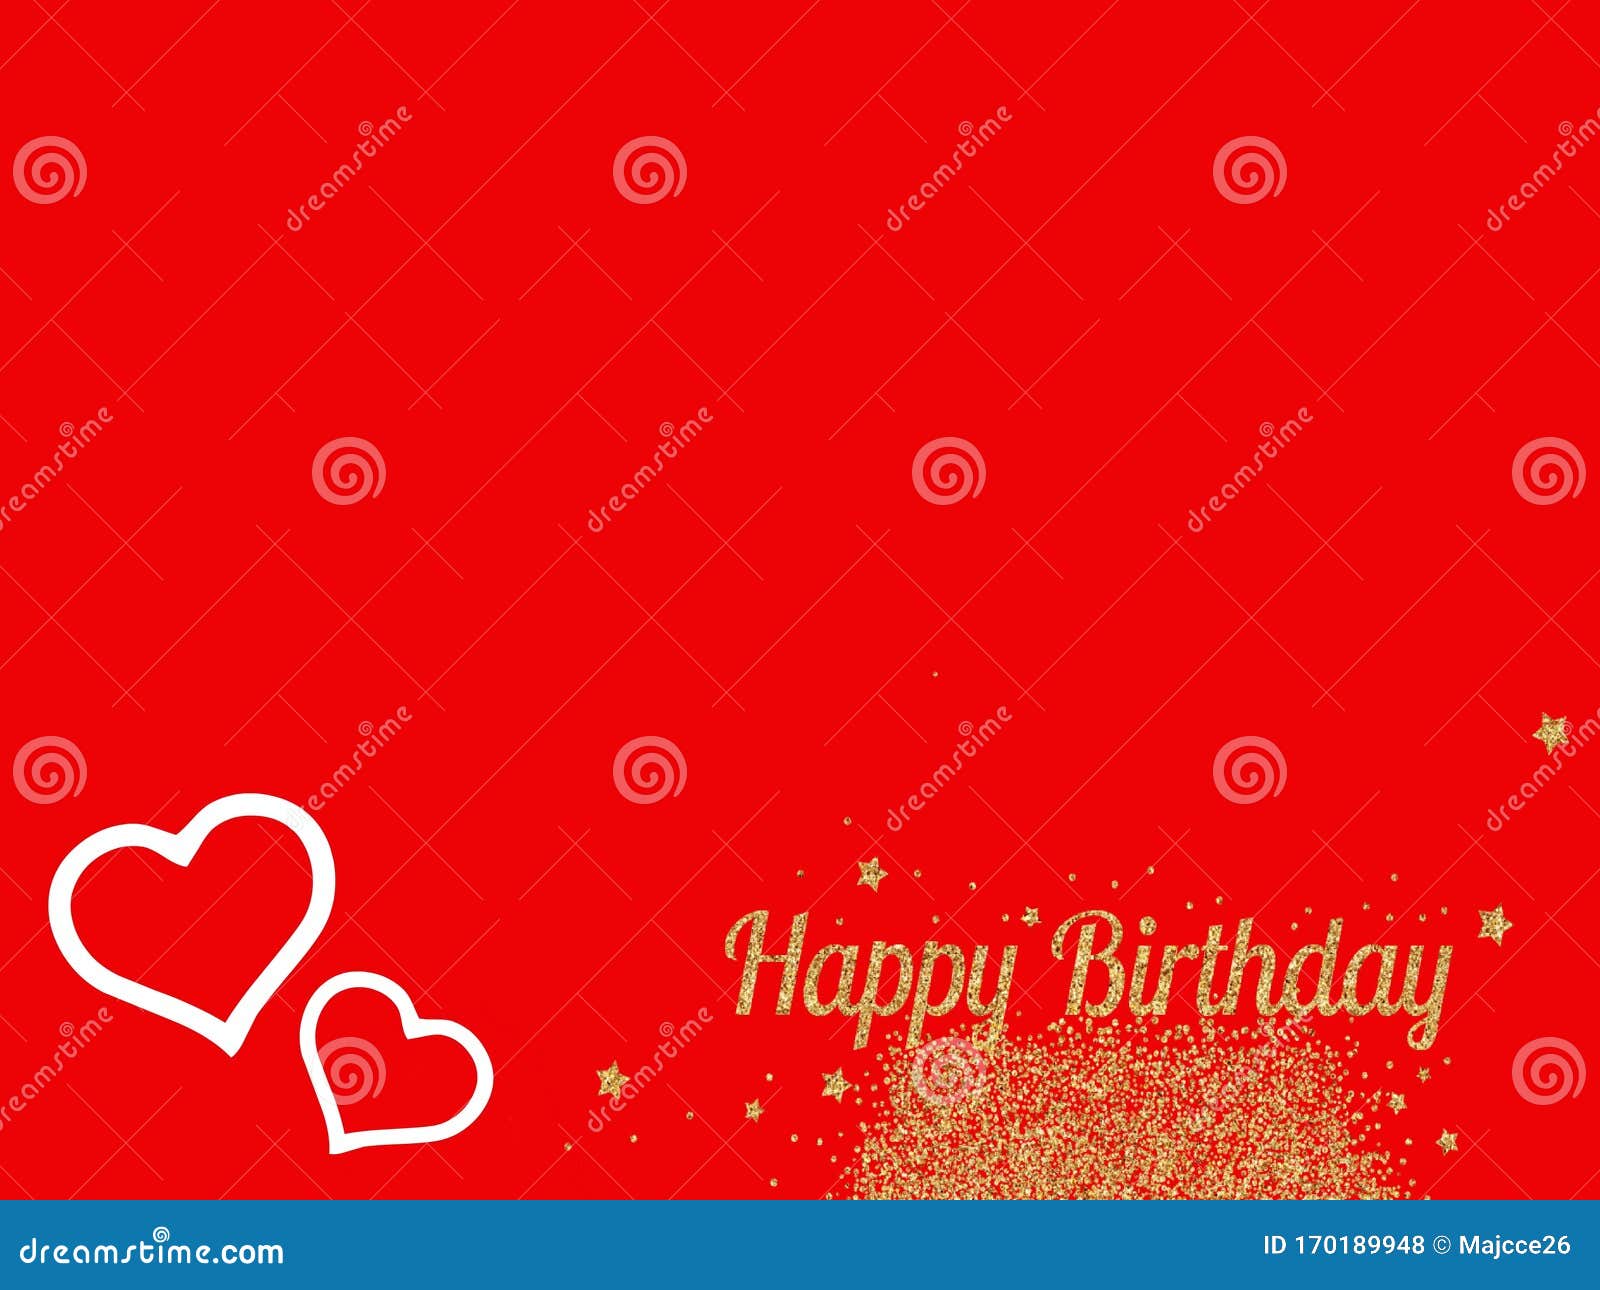 Valentines Day Background Red Romantic Hearts Romance Love Abstract Pattern  Card Happy Birthday Stock Illustration - Illustration of pattern, hearts:  170189948